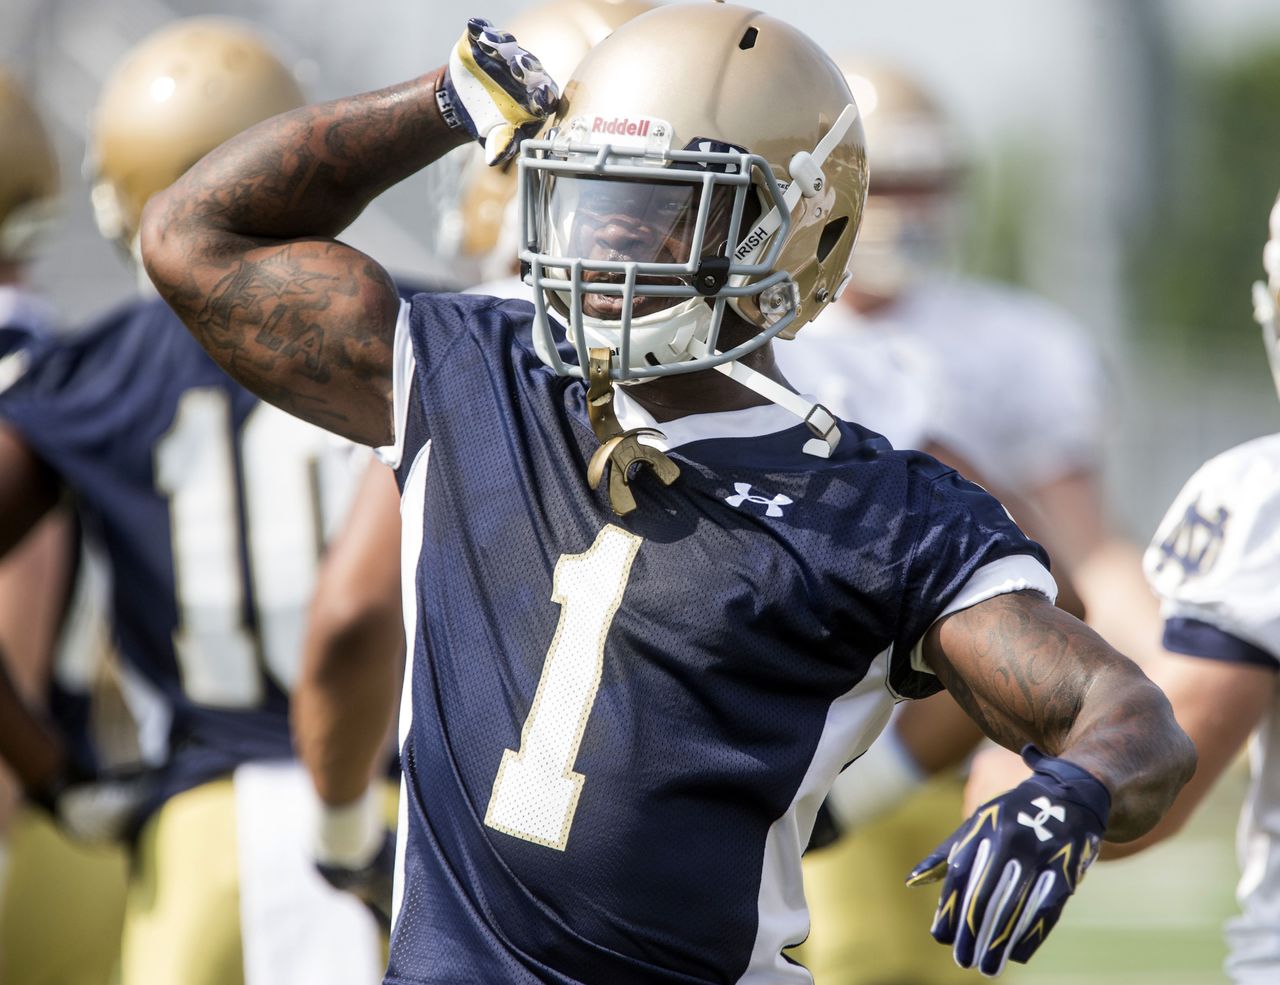 In this Aug. 4, 2014, photo, Notre Dame’s Greg Bryant salutes a teammate during a practice session in Culver, Ind. Bryant was declared brain dead Sunday, the day after he was found shot in a car on Interstate 95 in South Florida. Bryant started his career at Notre Dame, spent last season attending ASA College and planned to play at the Univesity of Alabama Birmingham.